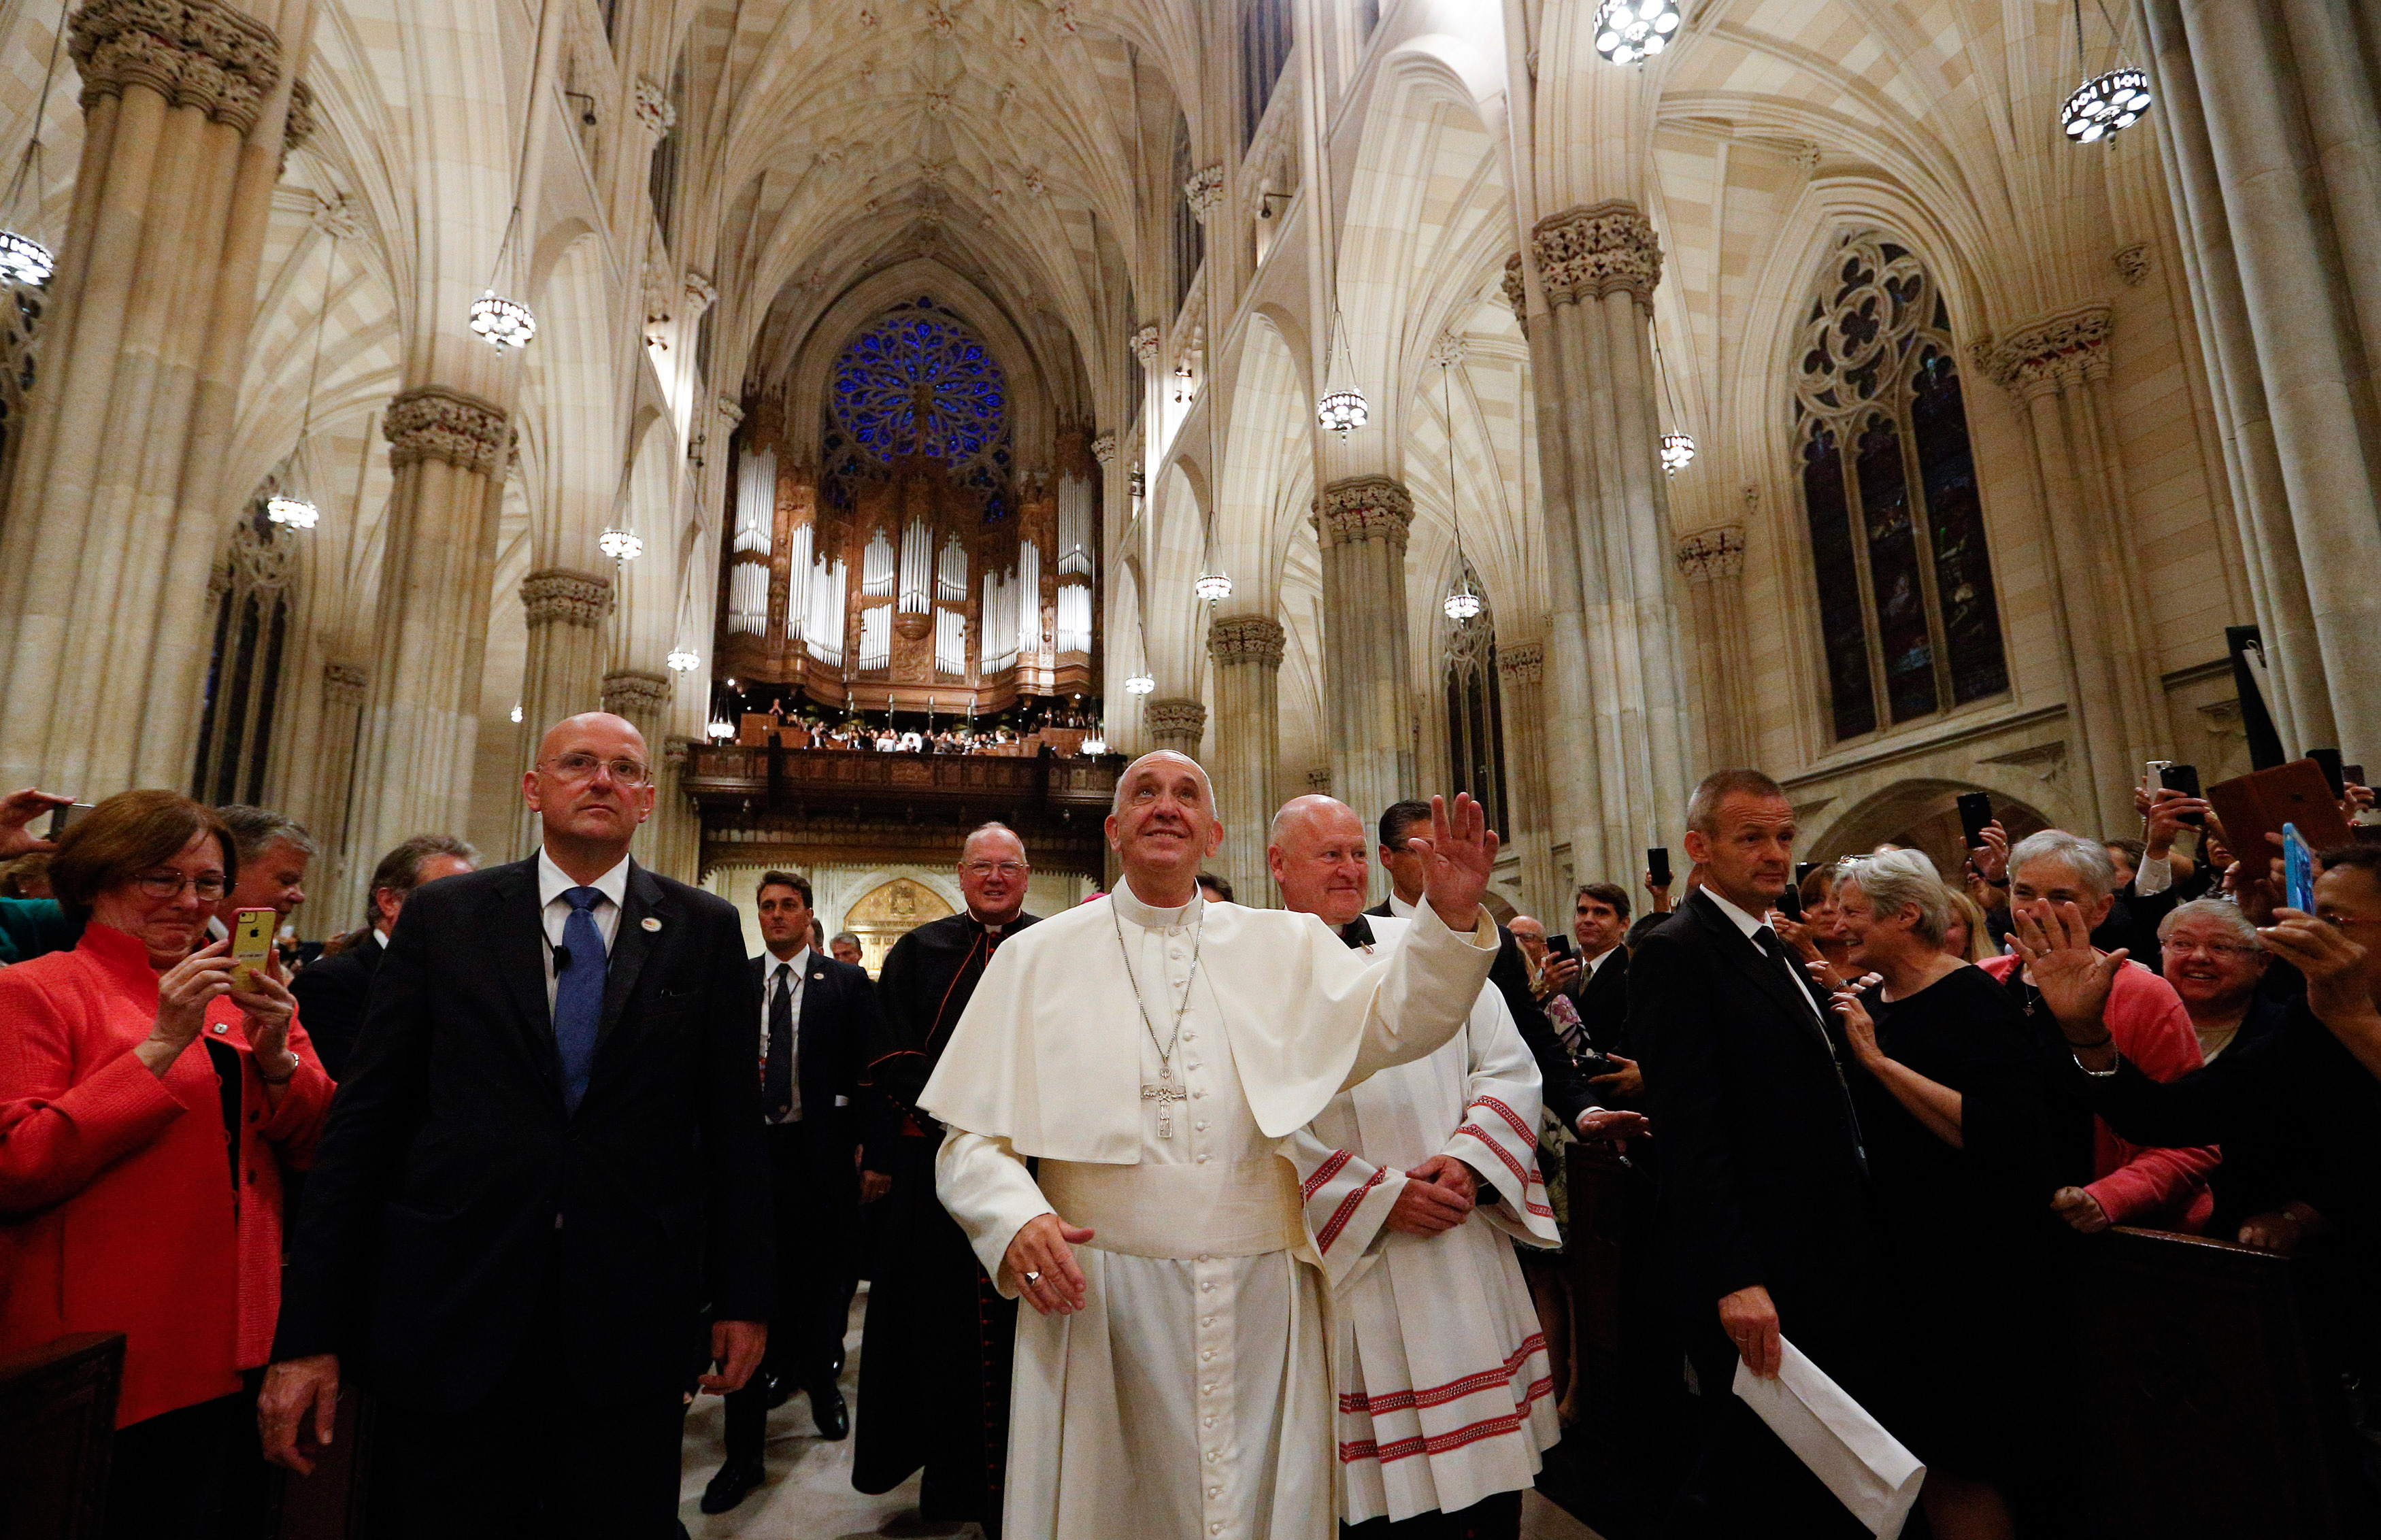 Pope Francis enters St. Patrick’s Cathedral, Manhattan, escorted by the rector, Msgr. Robert T. Ritchie, and Cardinal Timothy Dolan before the start of a prayer service led by the Holy Father Sept. 24. Photo © Catholic News Service/Paul Haring